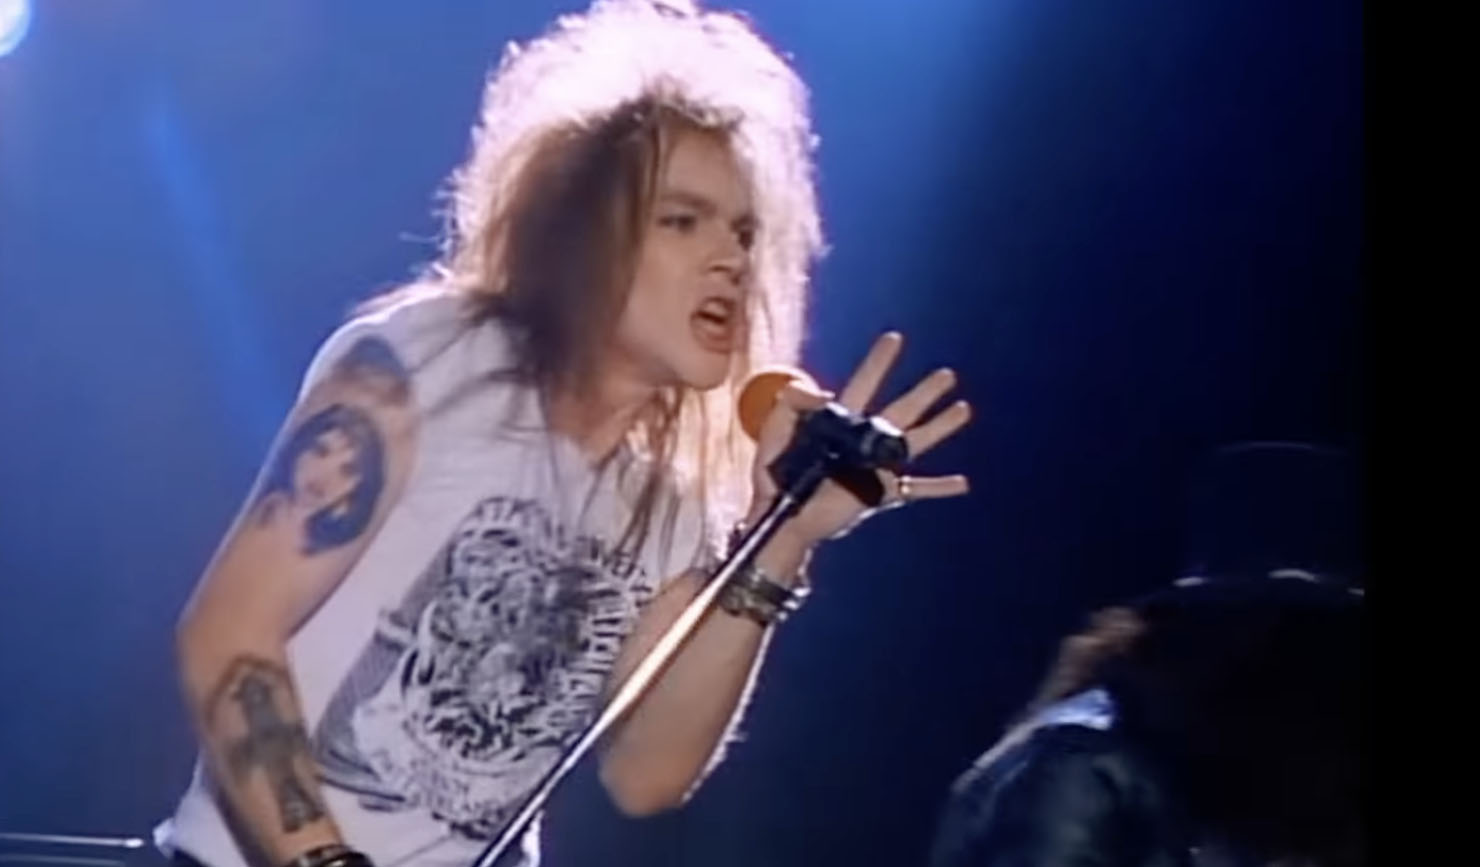 The 50 greatest Guns N' Roses songs ever, and the stories behind them